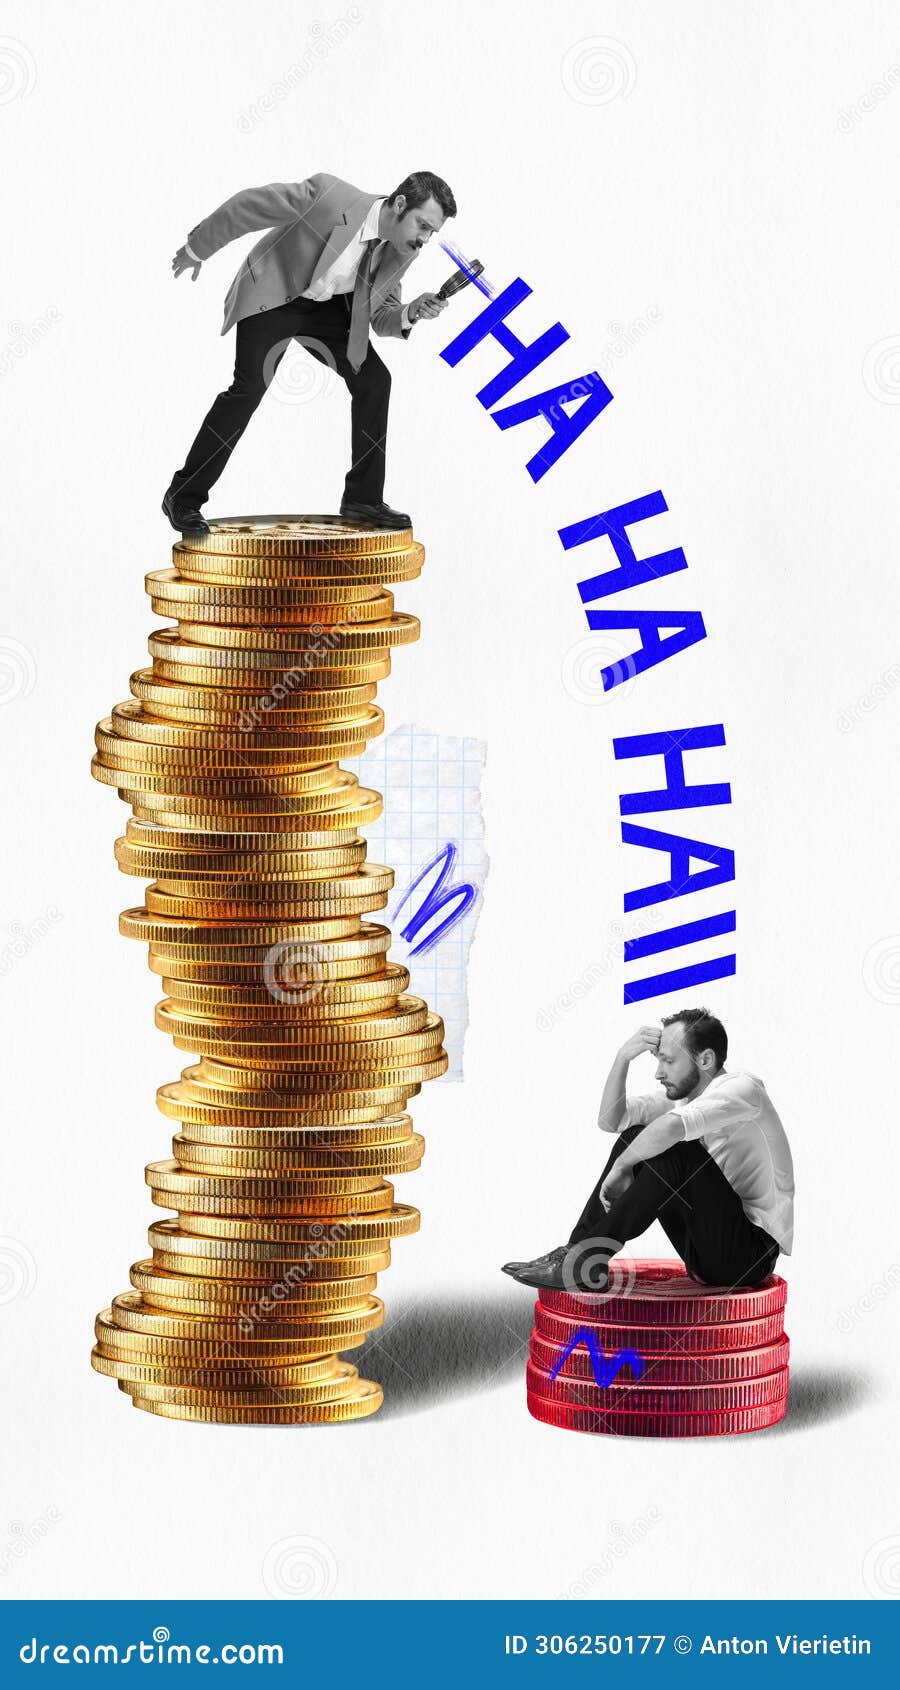 poster. contemporary art collage. successful and rich man stands on larger stack of coins and mocks man who sits on